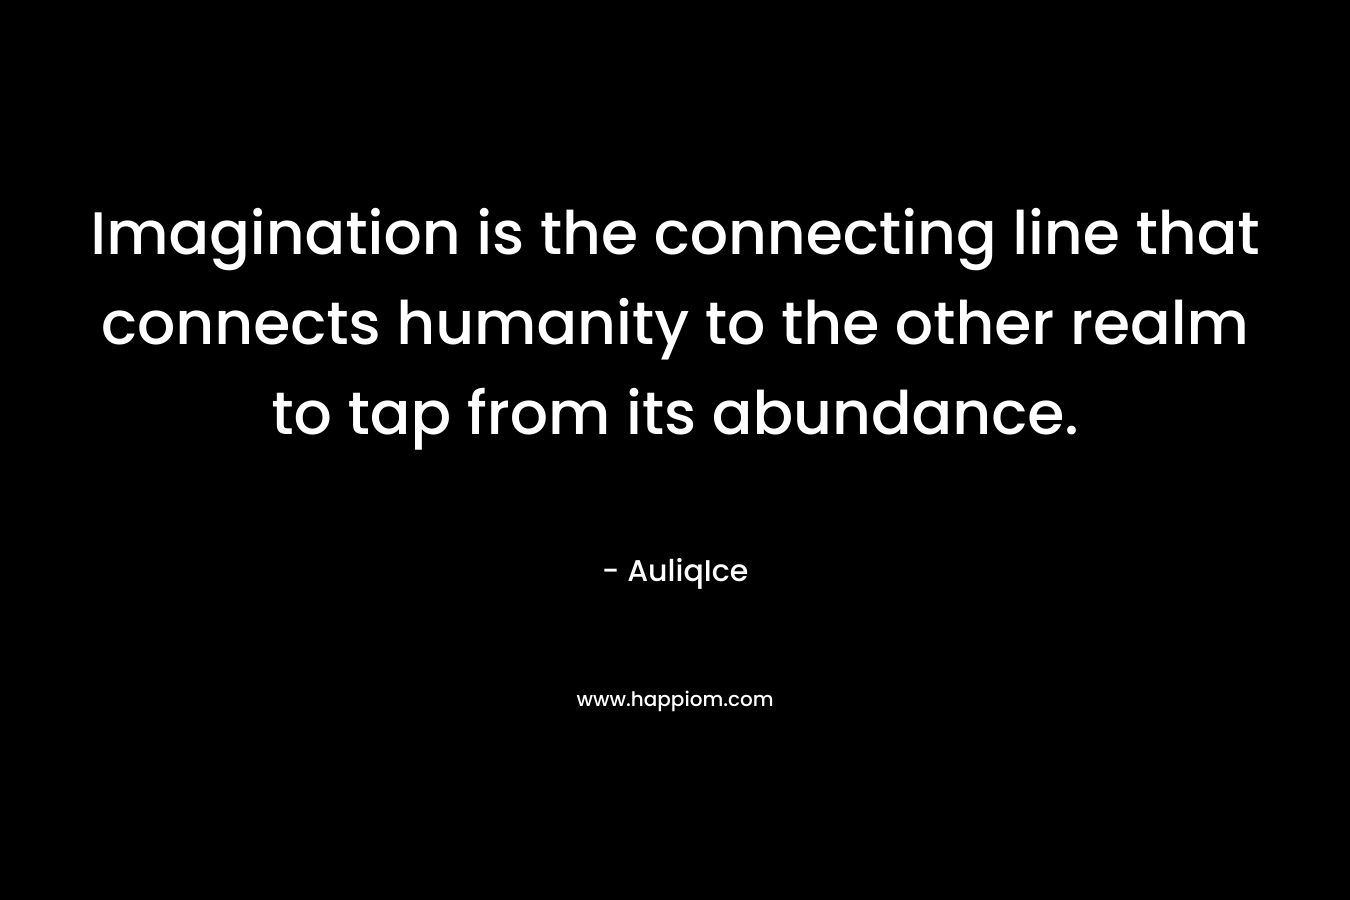 Imagination is the connecting line that connects humanity to the other realm to tap from its abundance. – AuliqIce